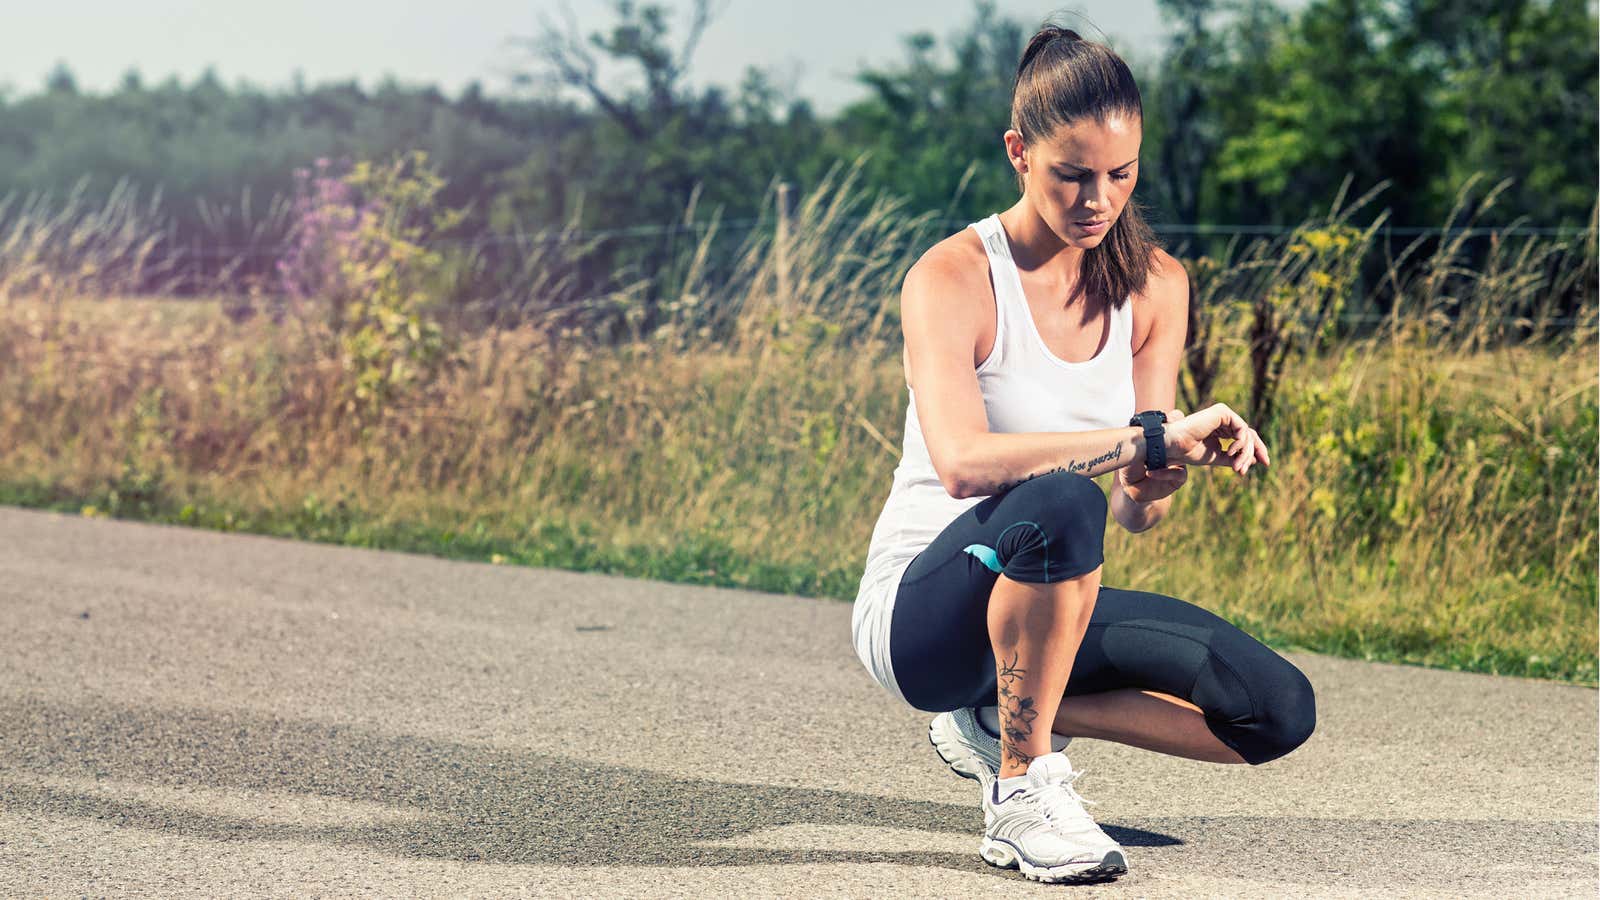 How data from wearable tech is transforming personal training and sport performance